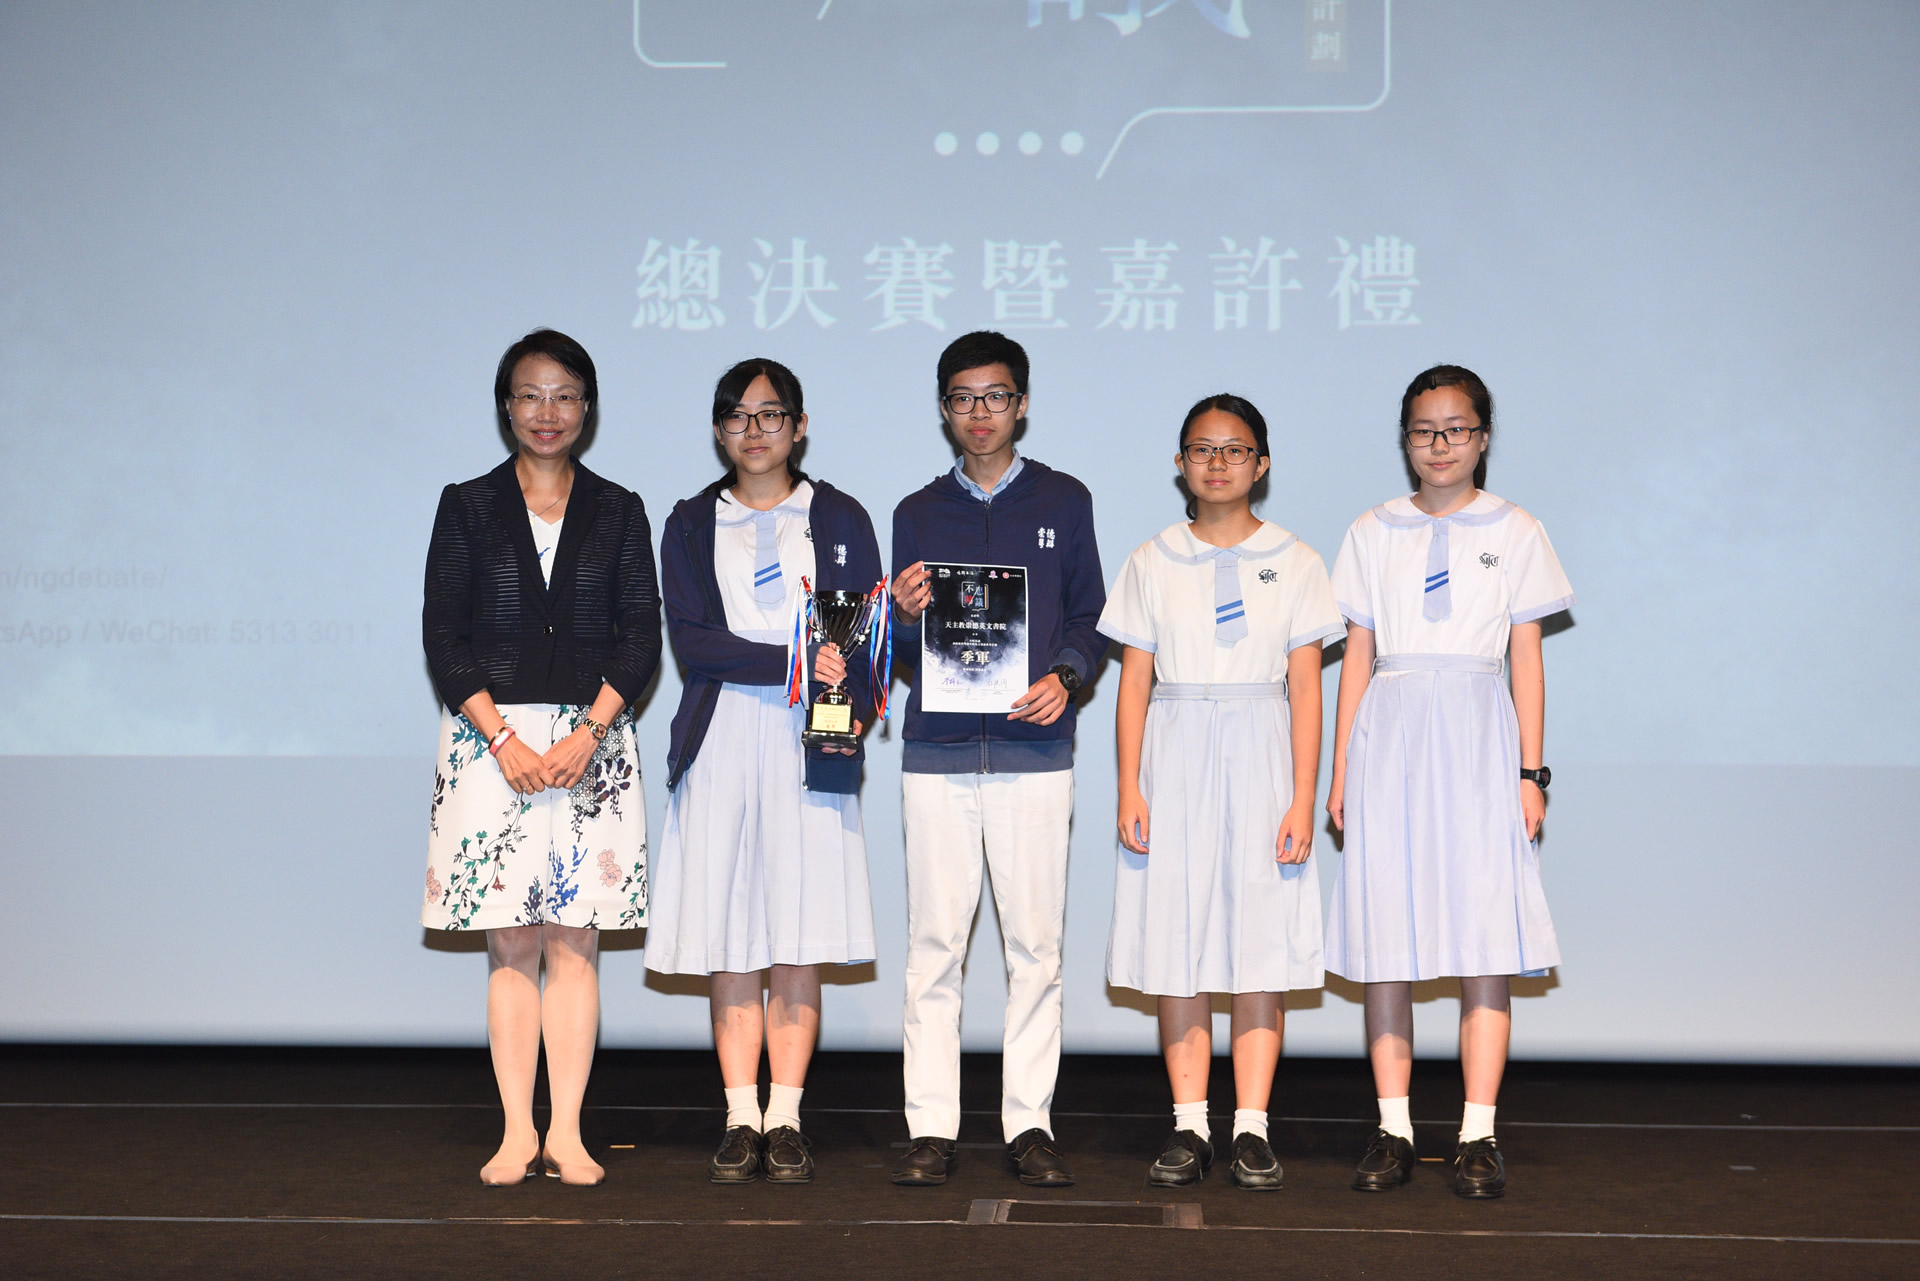 Shung Tak Catholic English College won the second runner-up of the competition.